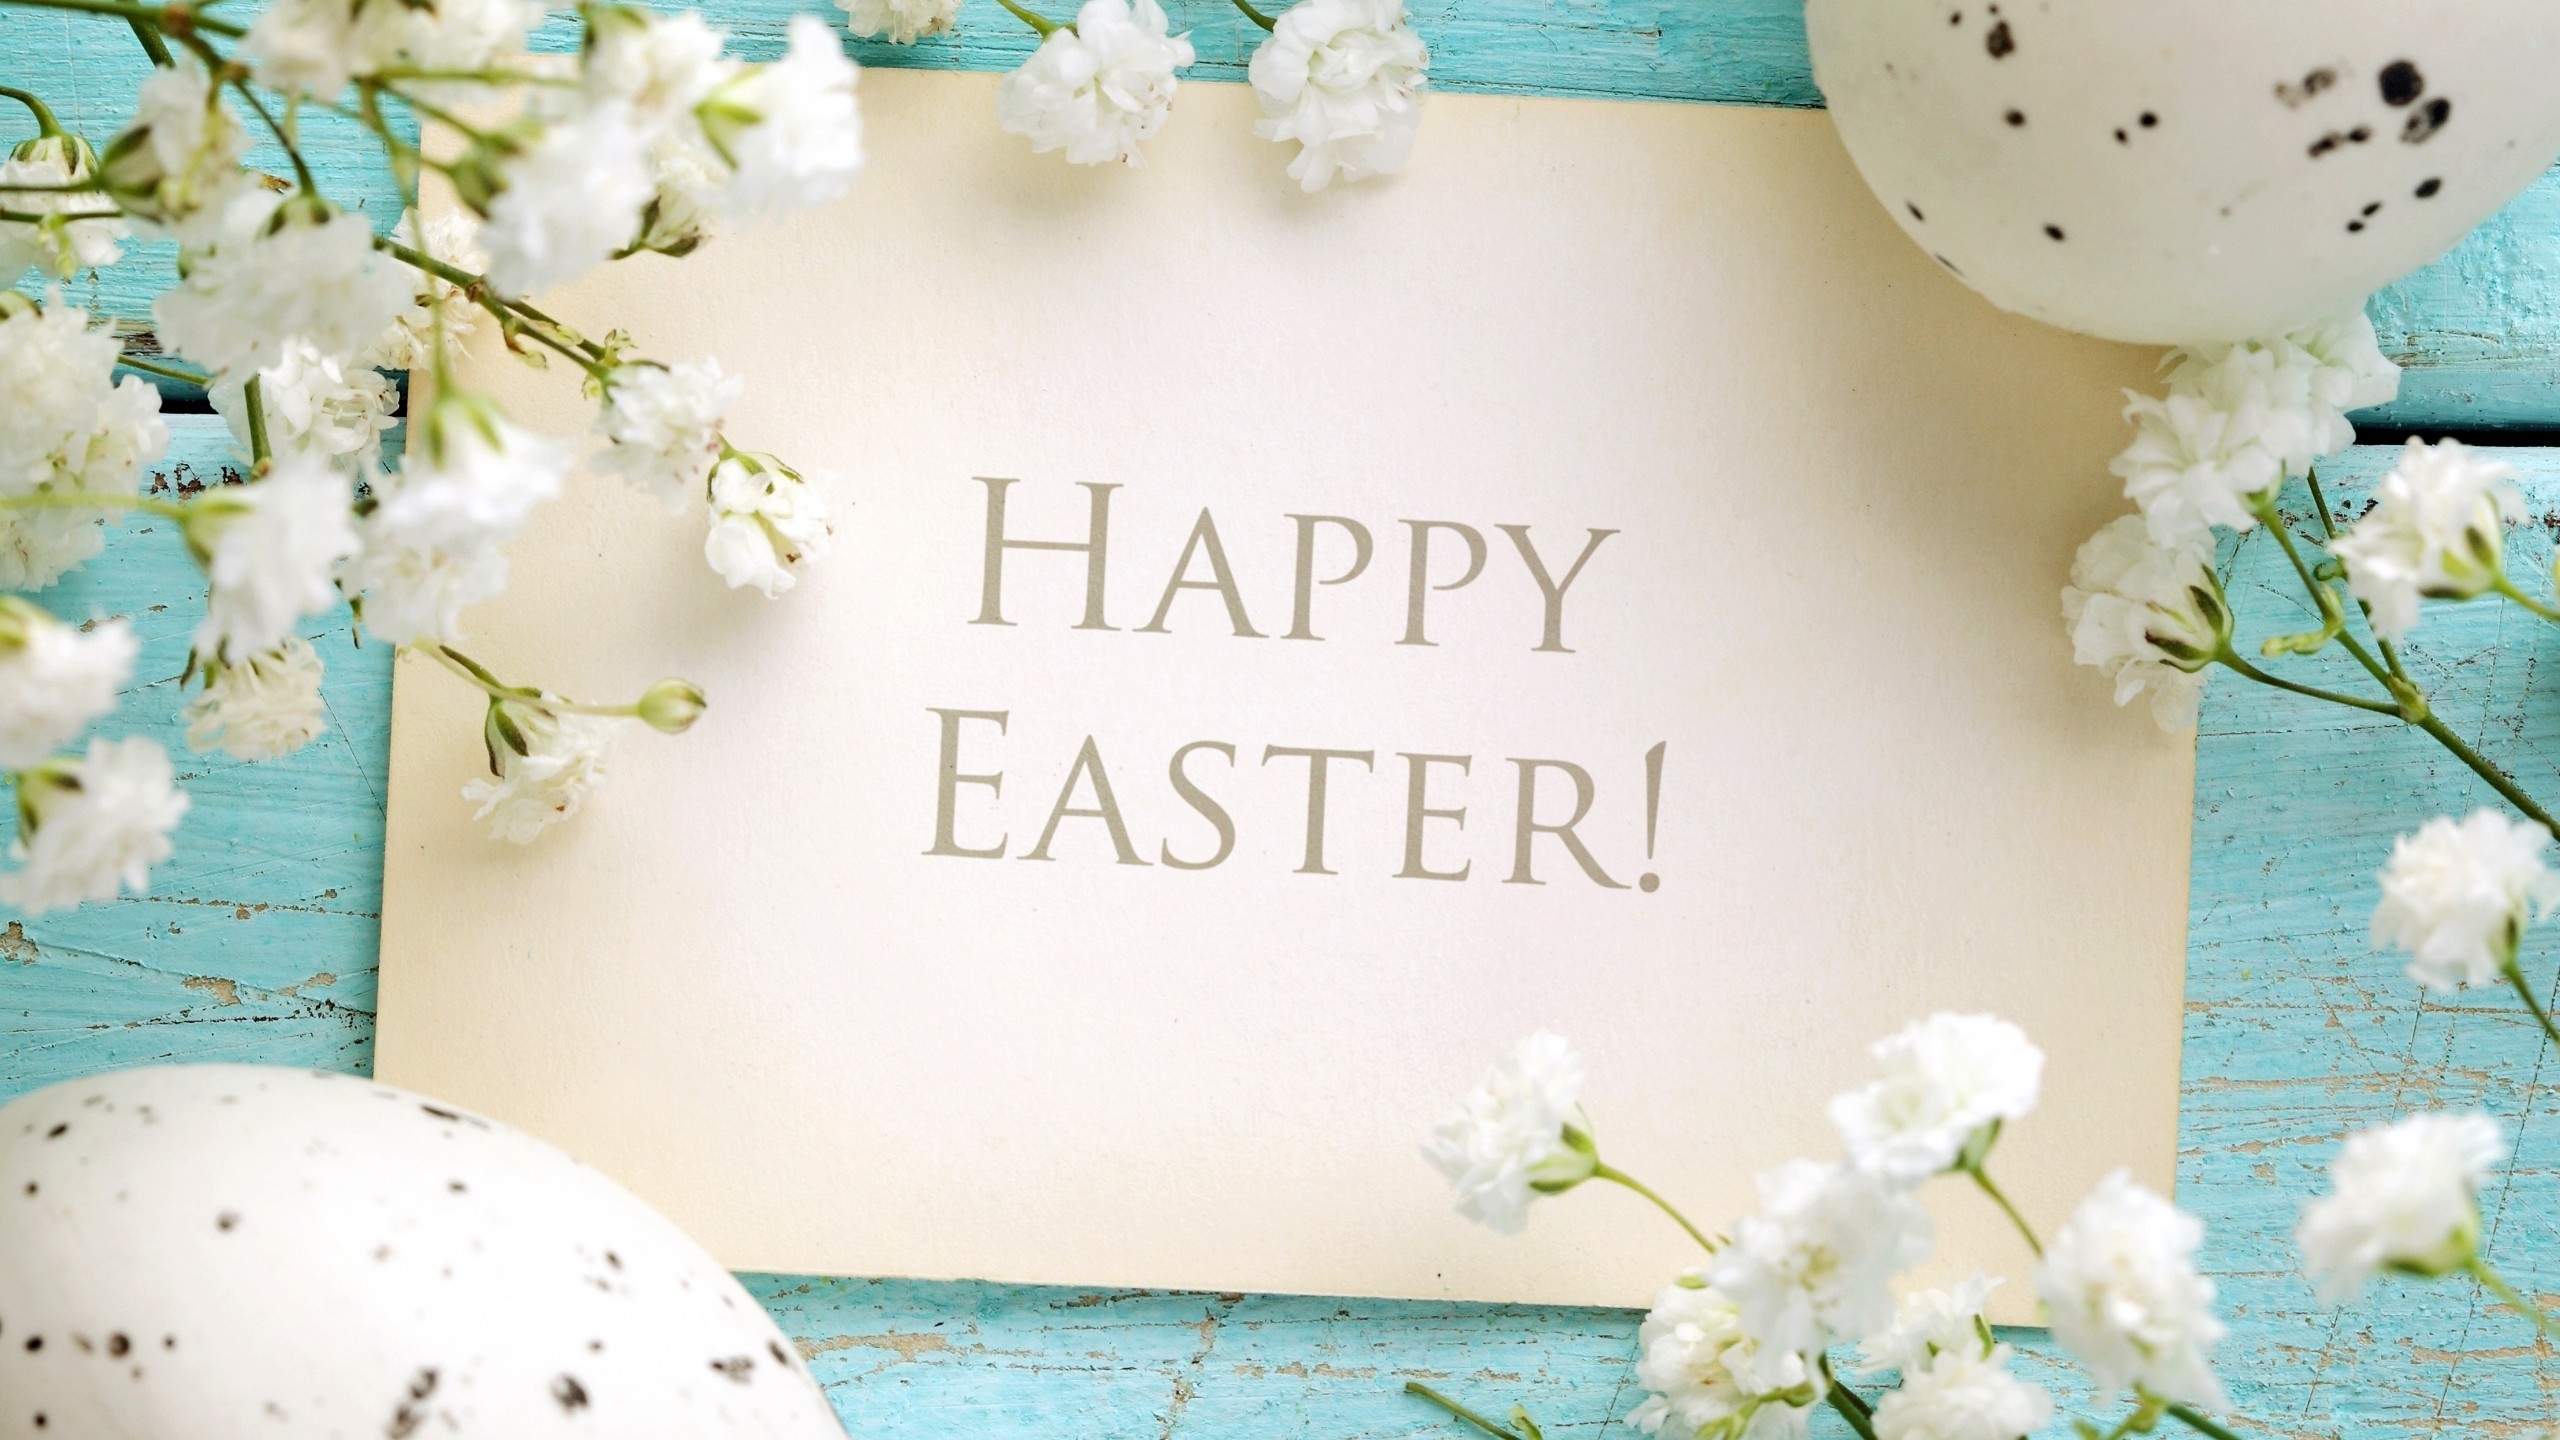 Happy Easter 2014 for 2560x1440 HDTV resolution